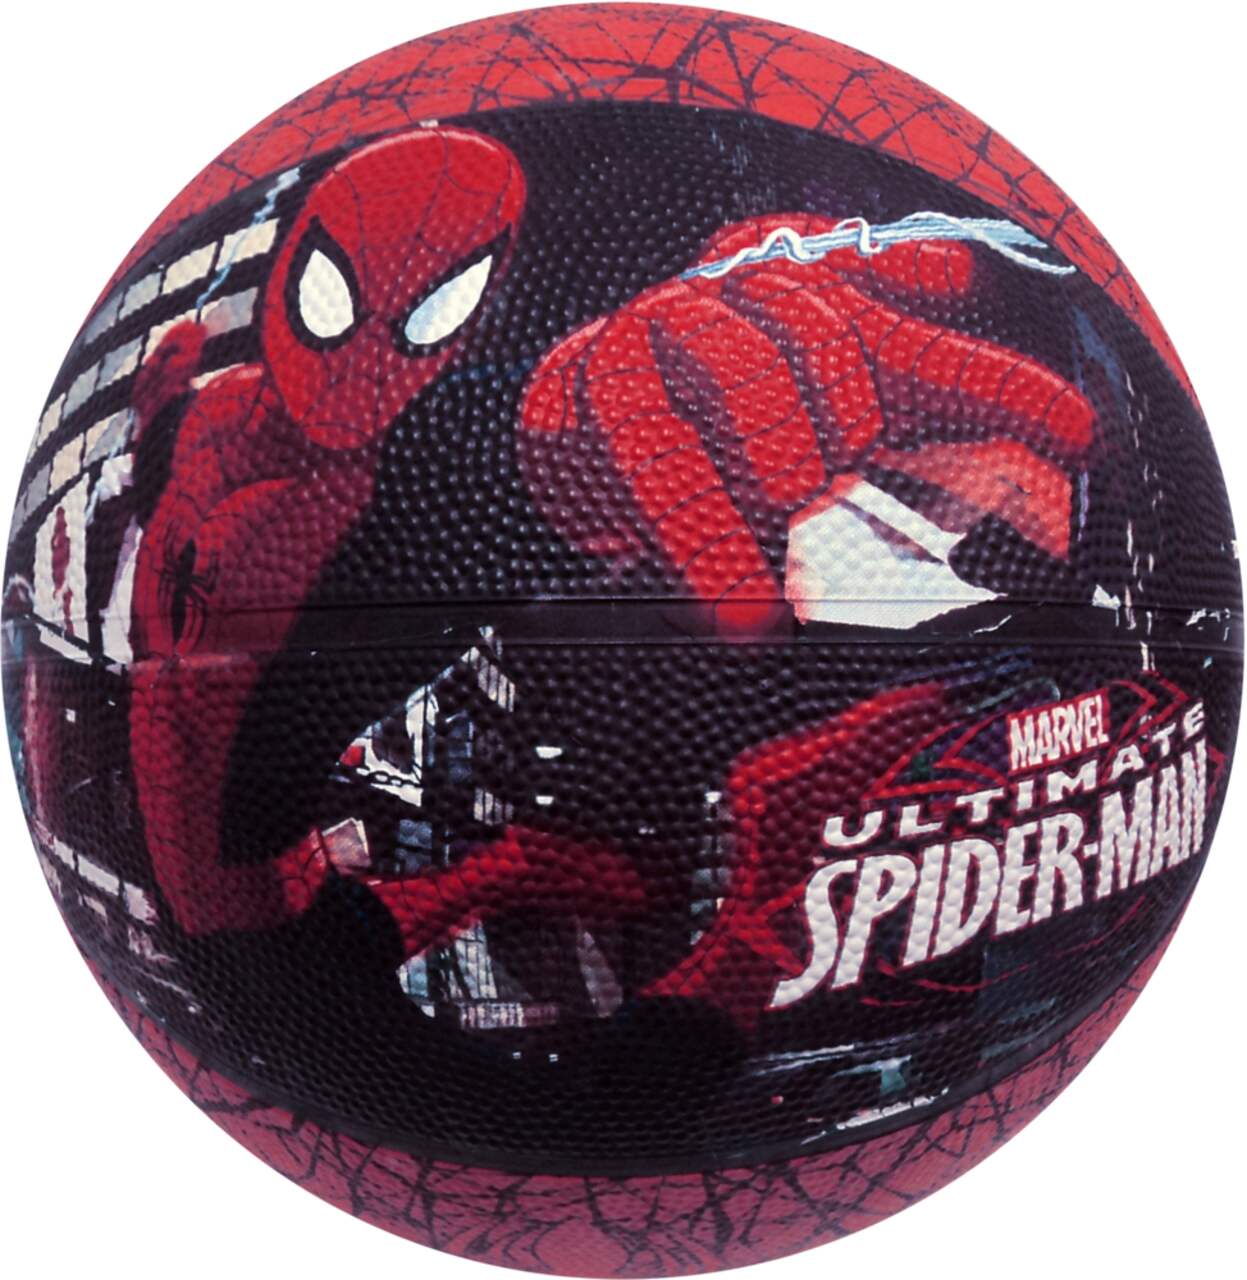 Marvel Spider-Man Basketball Size 6, Avengers Indoor and Outdoor